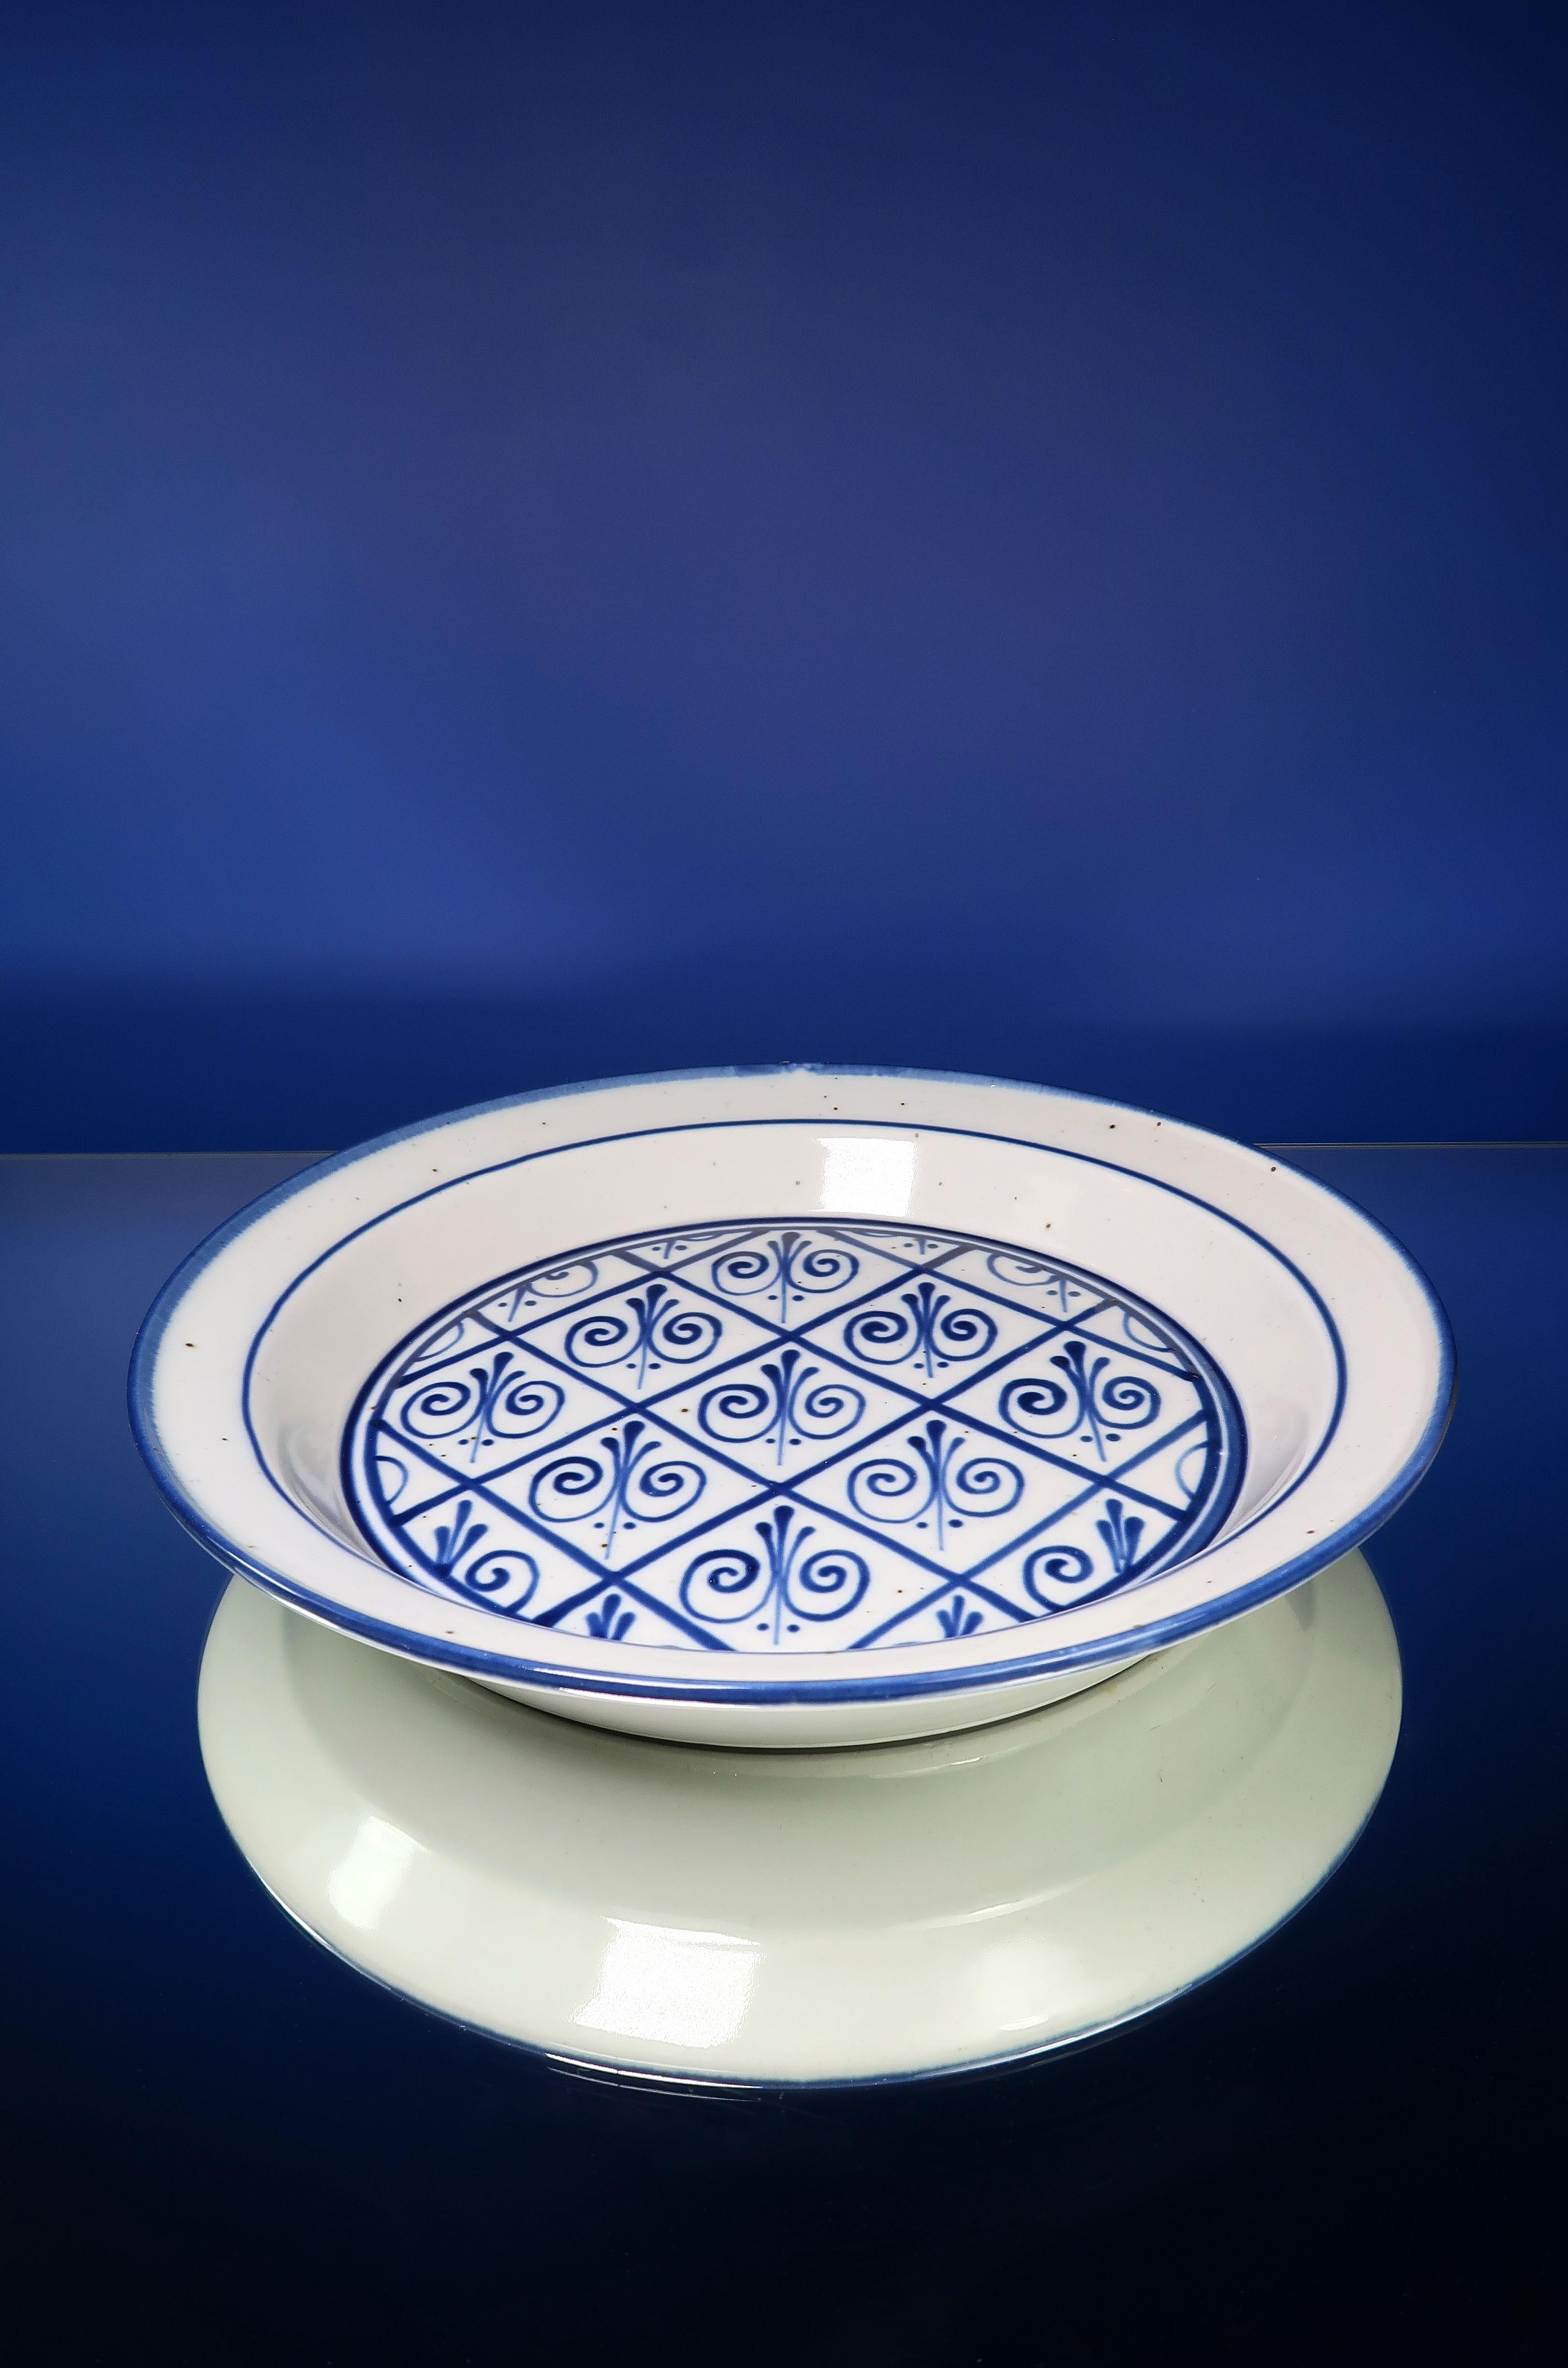 Beautiful Danish midcentury modern stoneware platter, centerpiece or wall decoration with hand painted deep blue floral decorations on light grey base. Designed by Niels Refsgaard for Eslau in 1966. Part of the Generation series manufactured for the